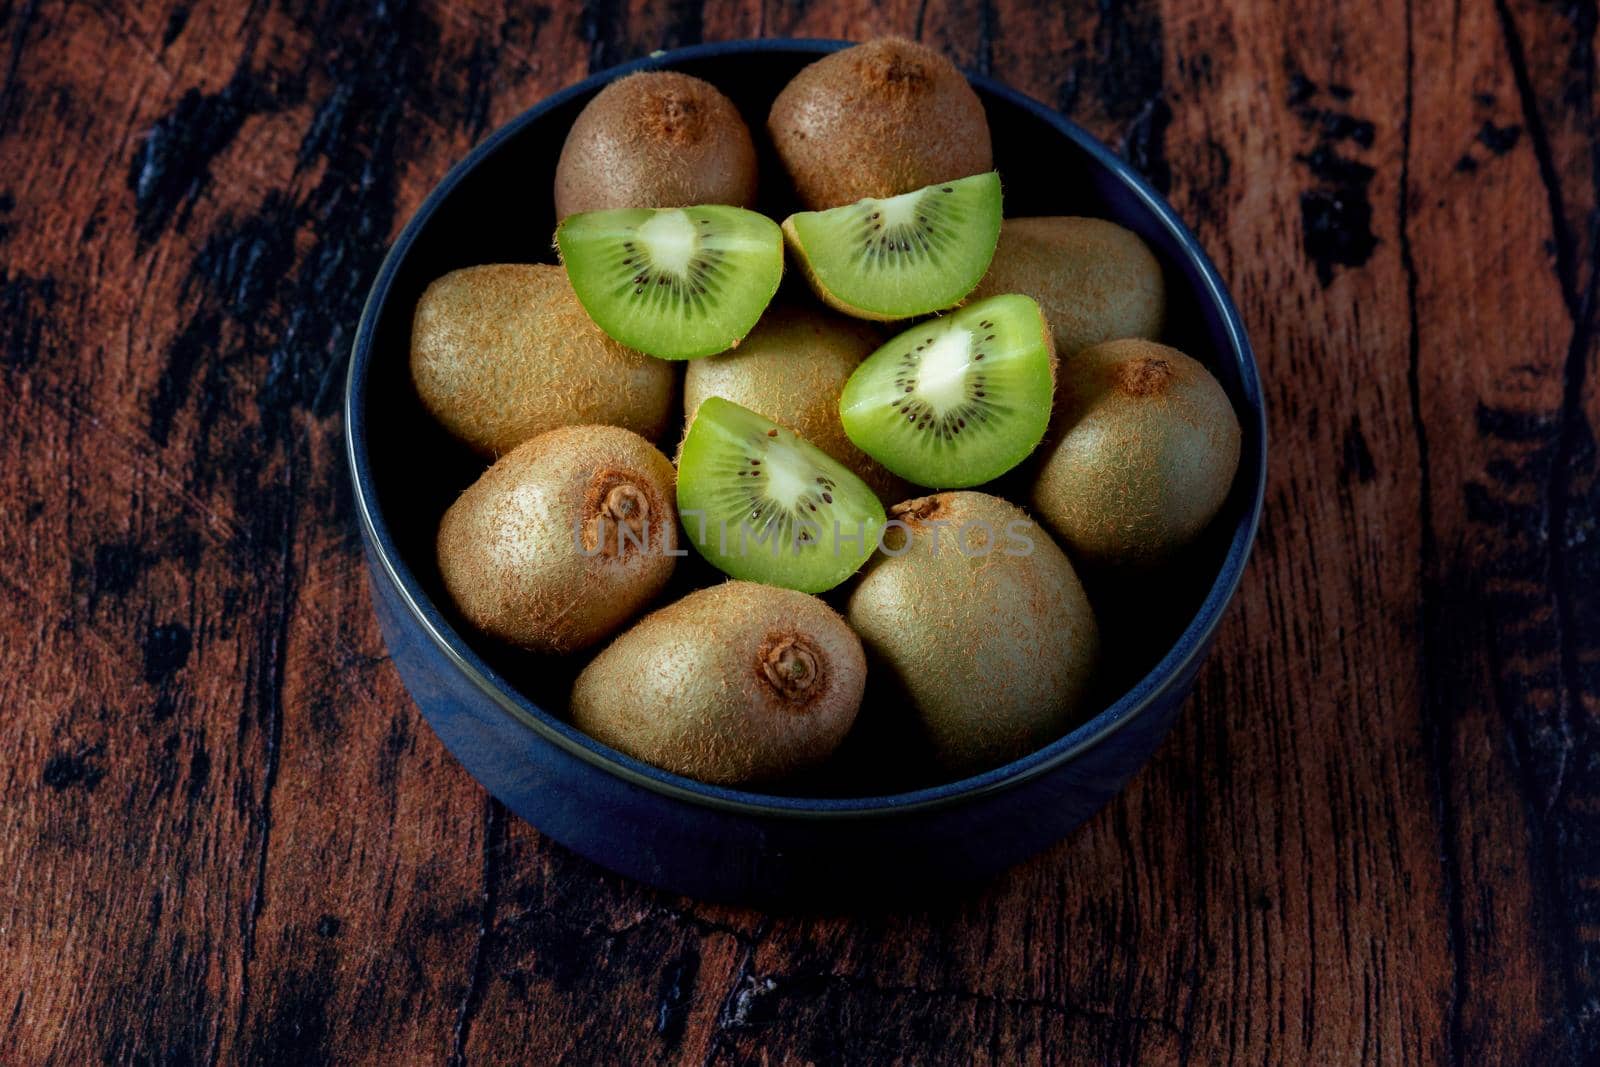 kiwi in a blue ceramic dish on an old wooden table